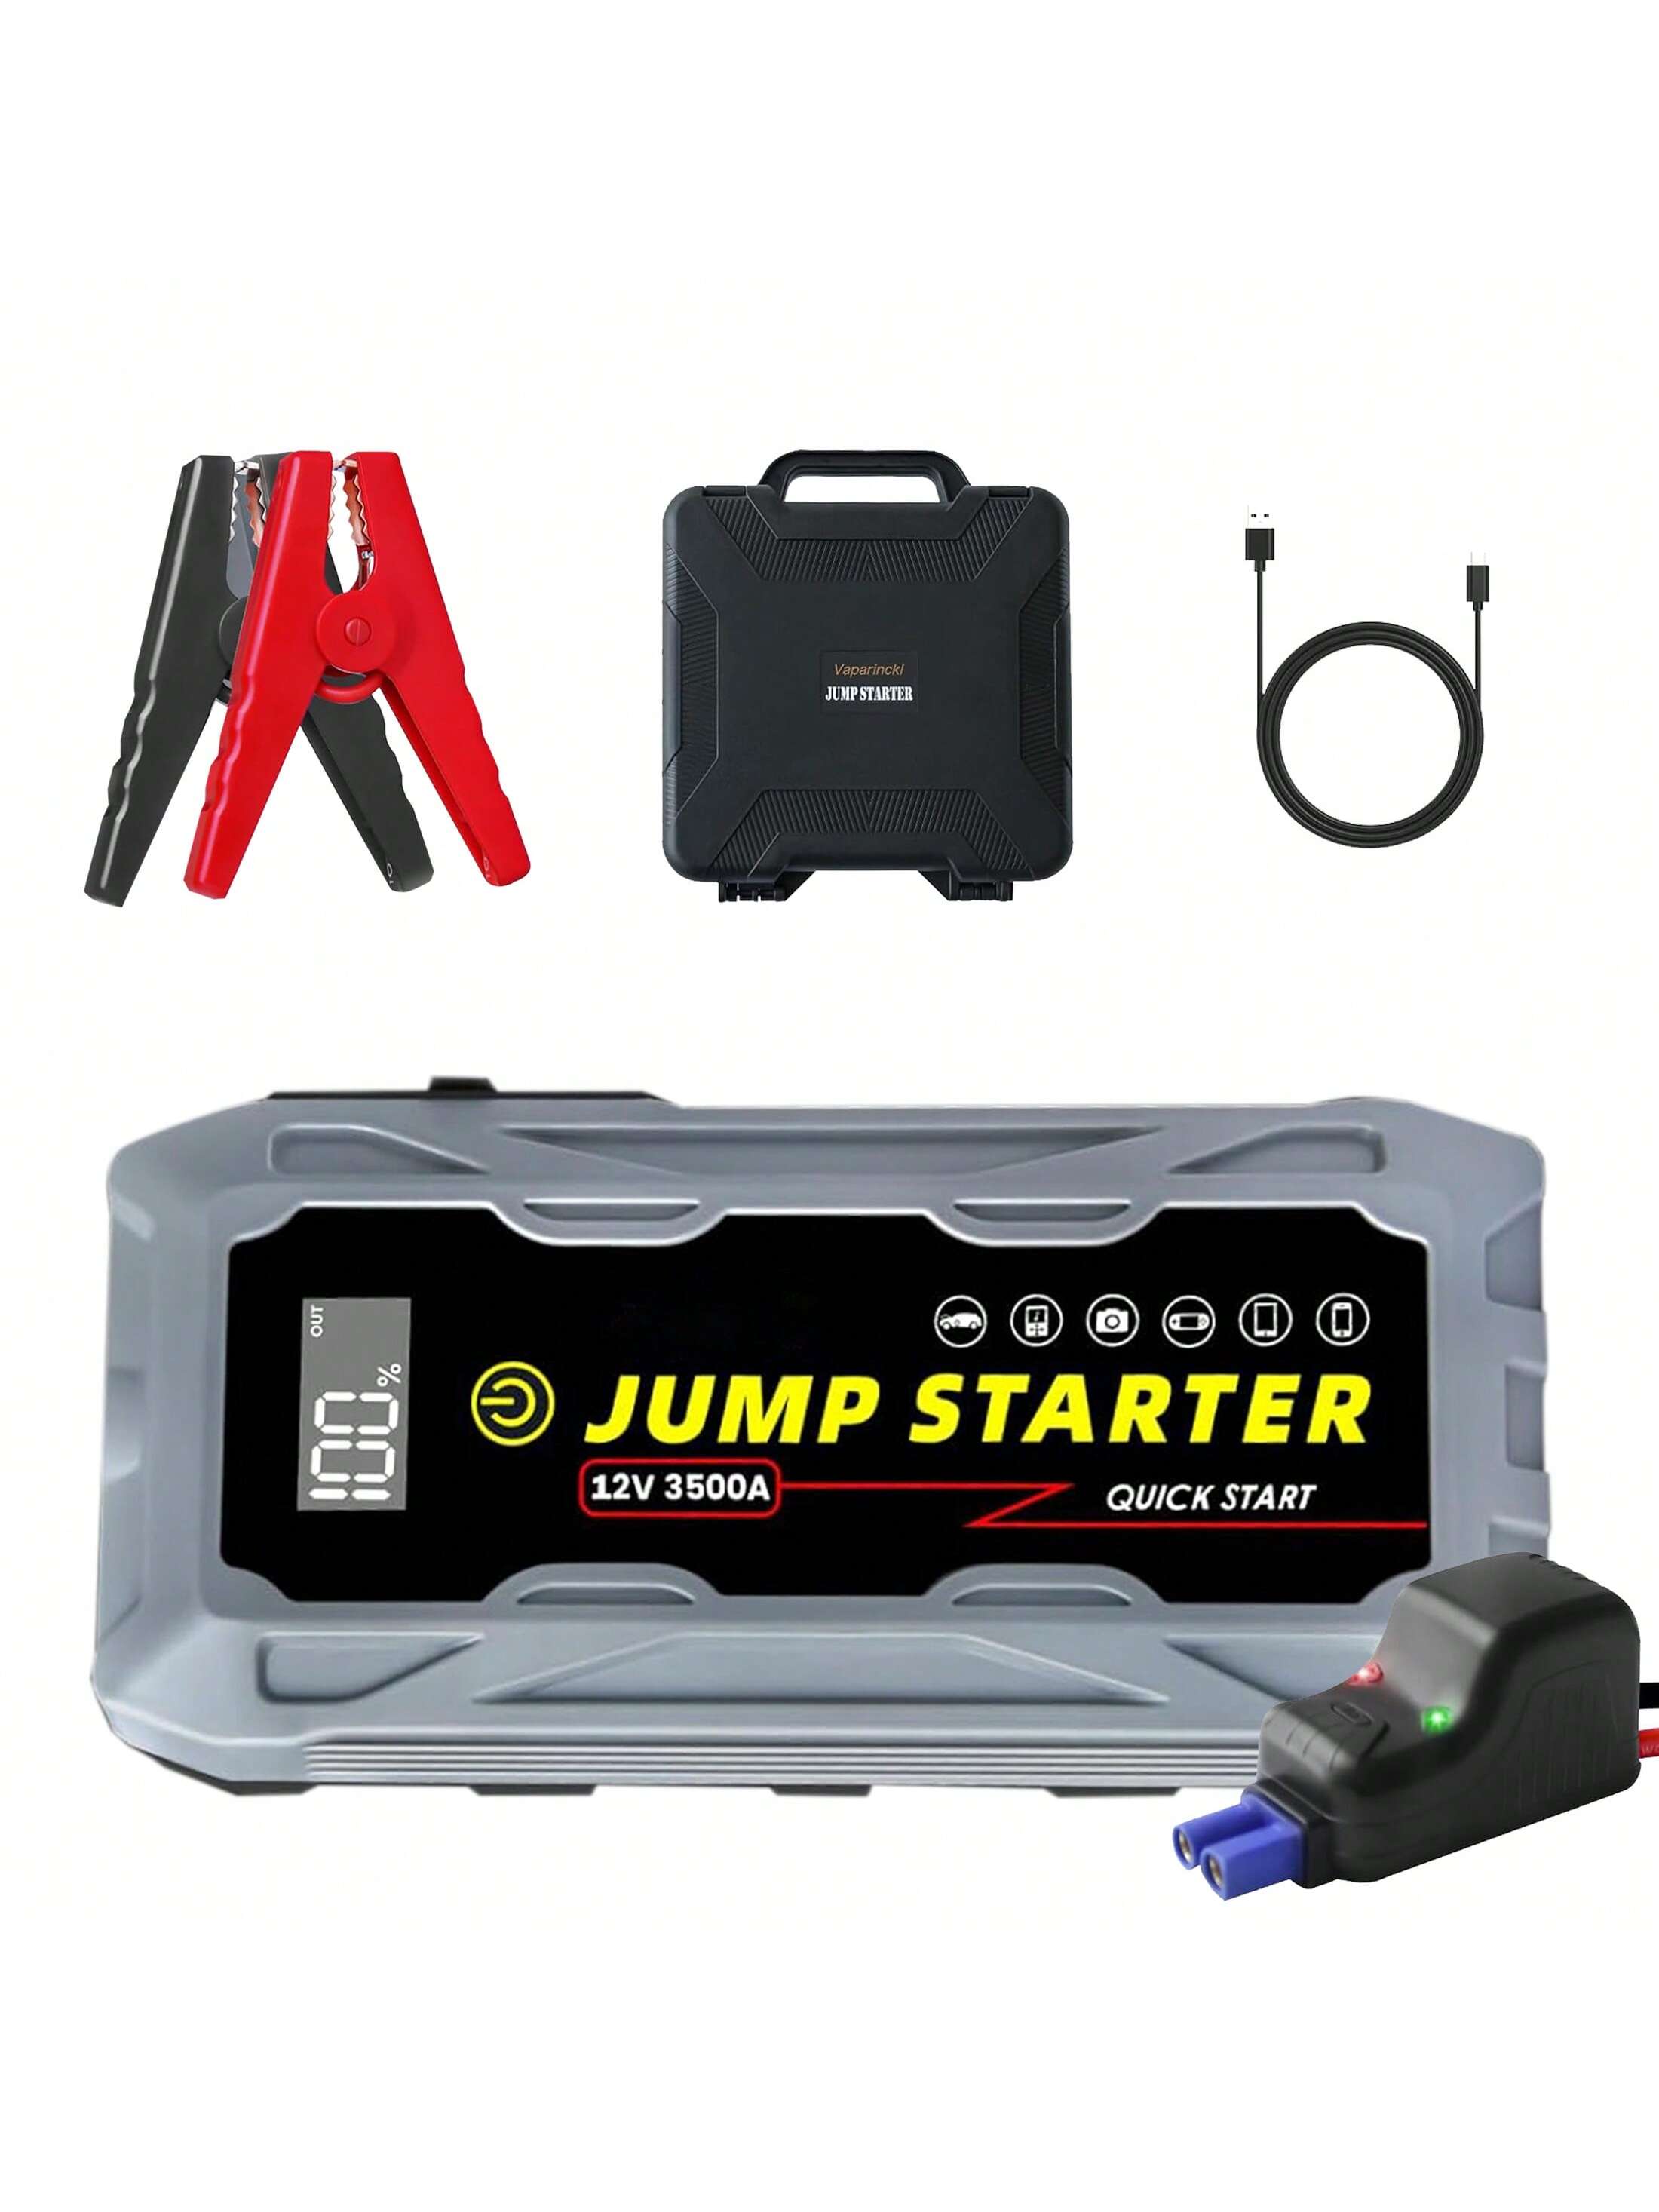 Automotive Jump Starter, 3500A Peak Battery Boost Starter For All Gasoline And 10.0L Engines With Dual USB QC3.0/Type-C/LED Lights, 12V Li-Ion Battery Automotive Jump Starter Kit